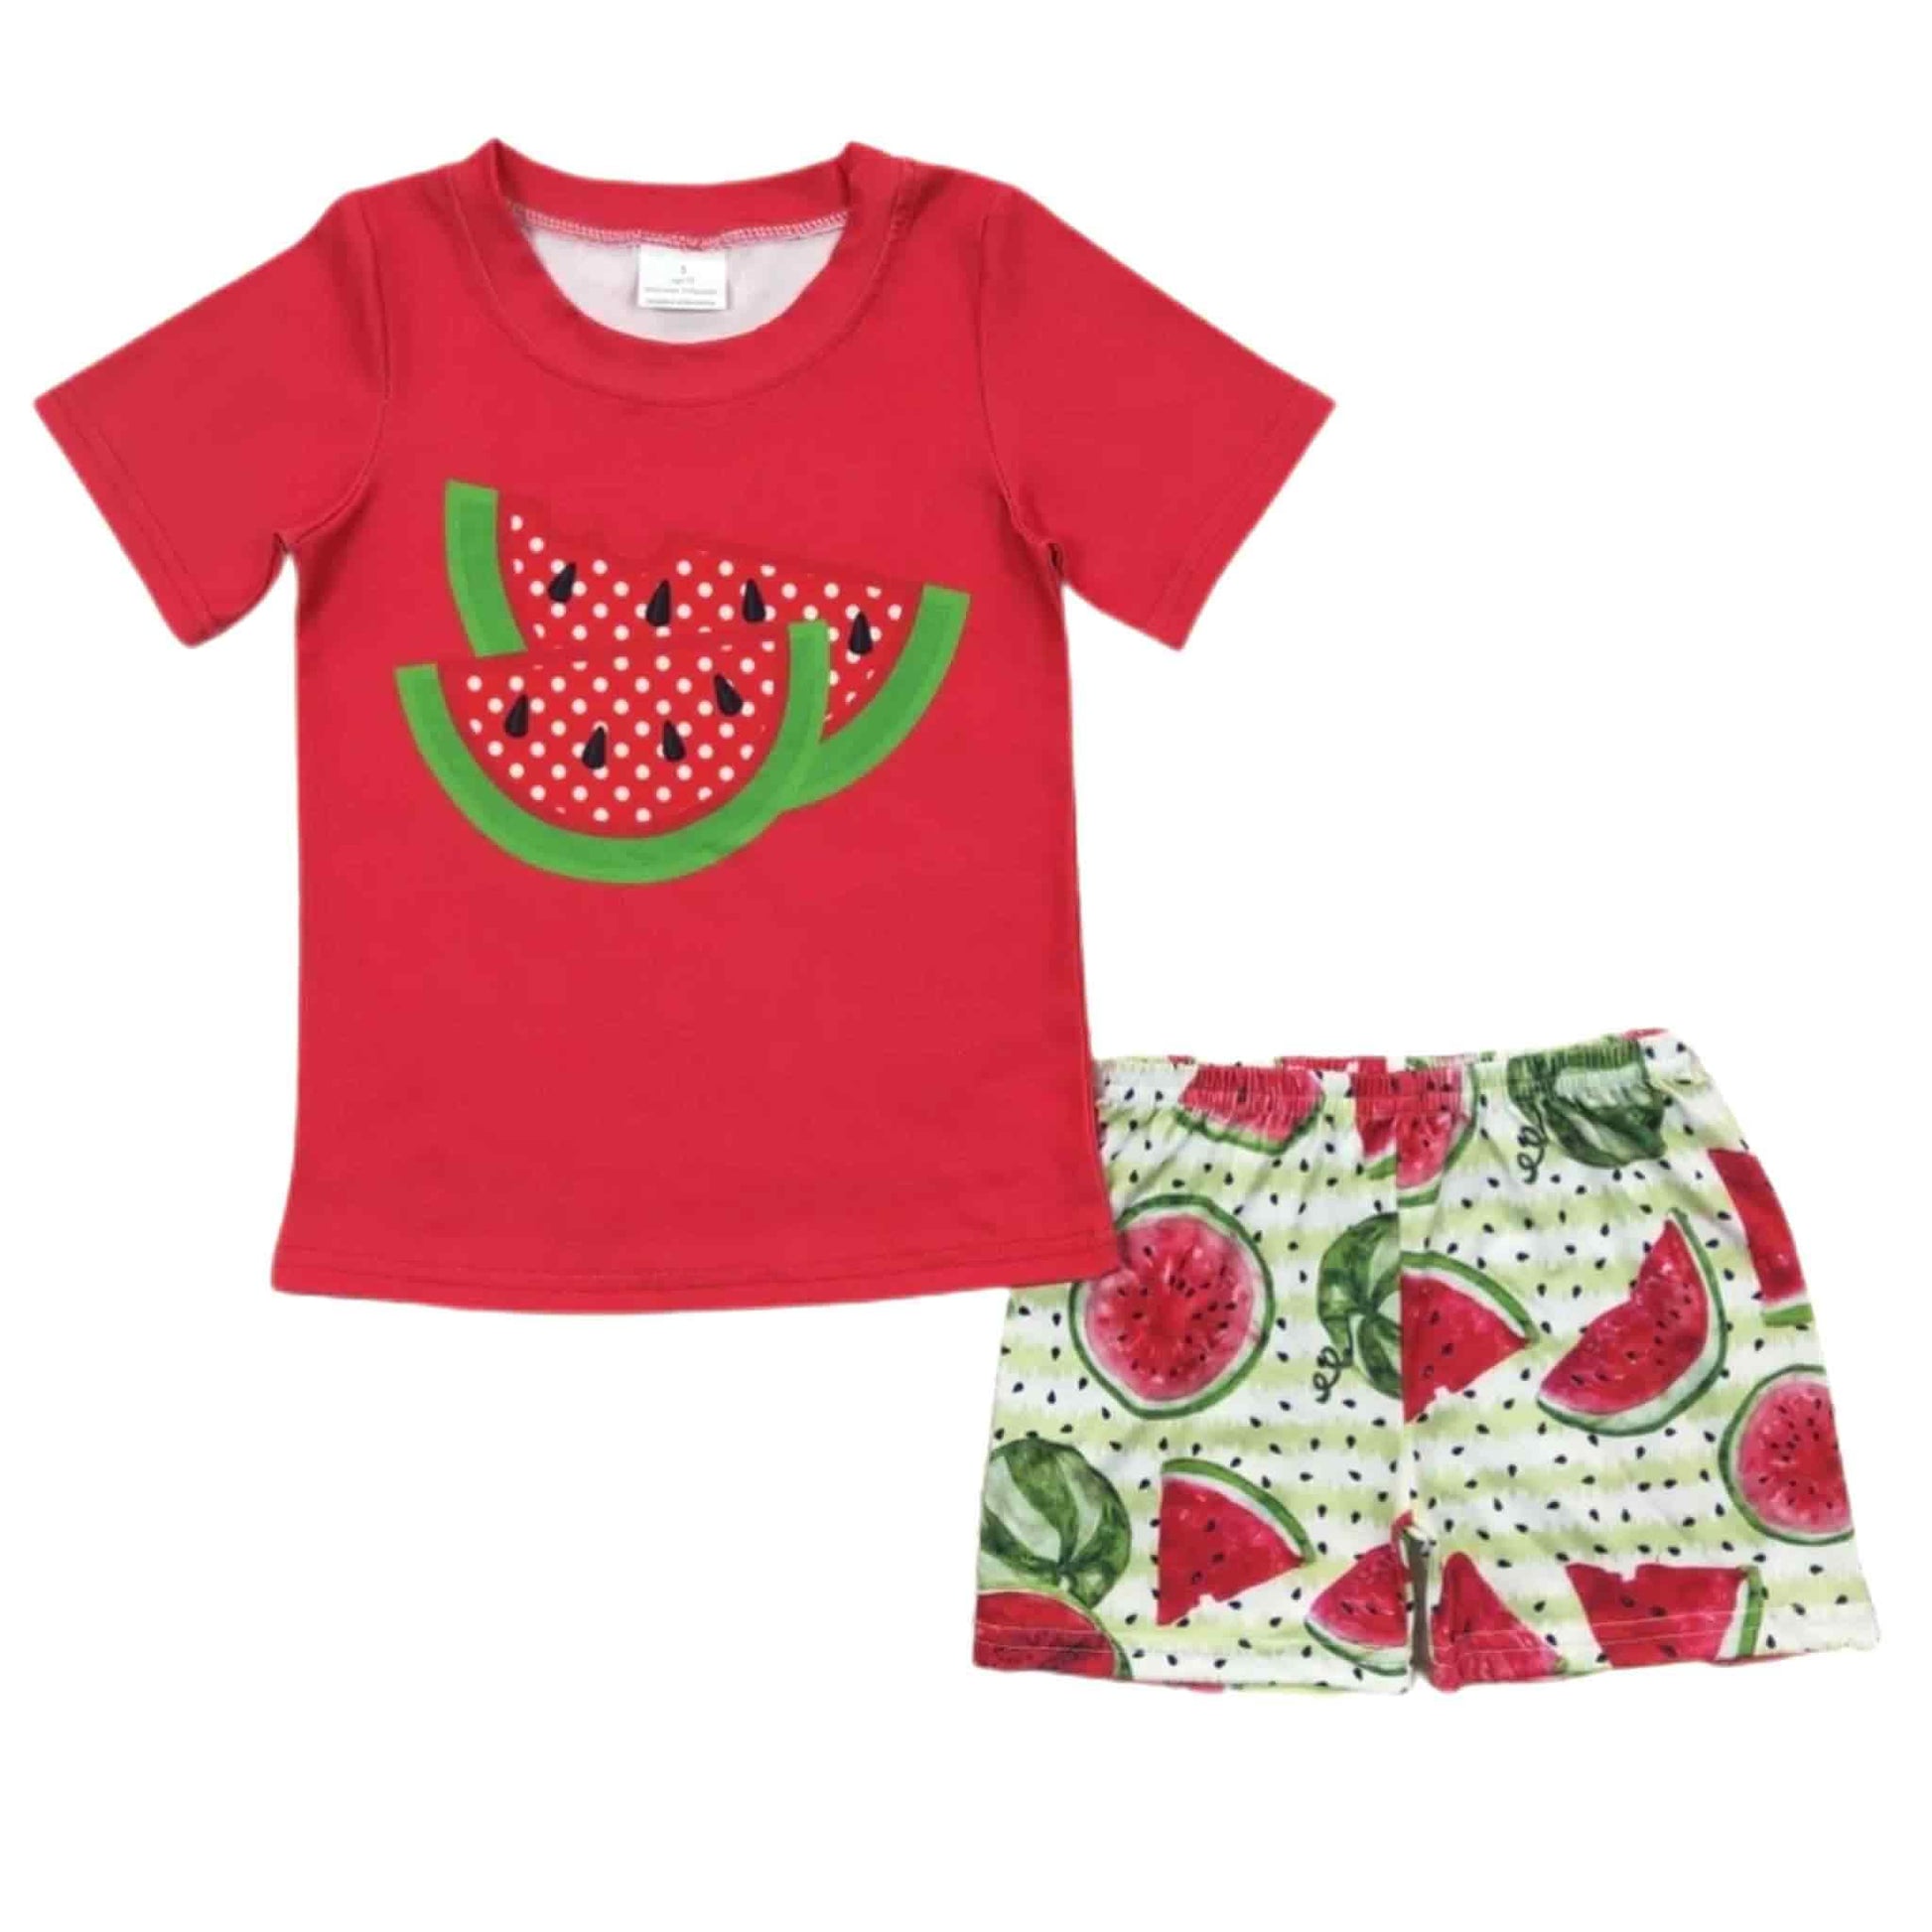 Where the Watermelons Grow Shorts Set